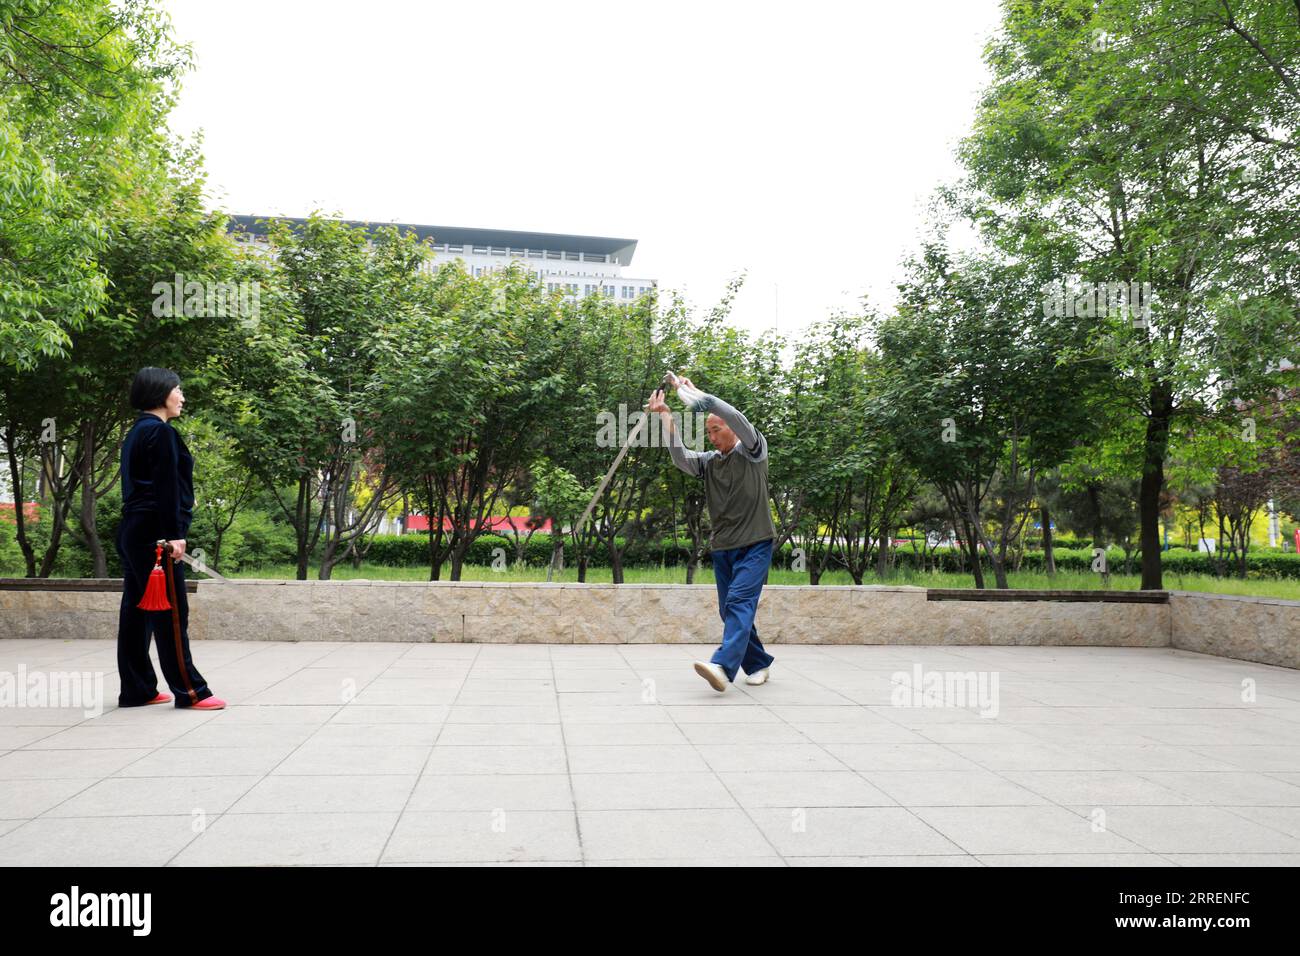 LUANNAN COUNTY, Hebei Province, China - May 4, 2020: two people practice Taiji sword in a park. Stock Photo